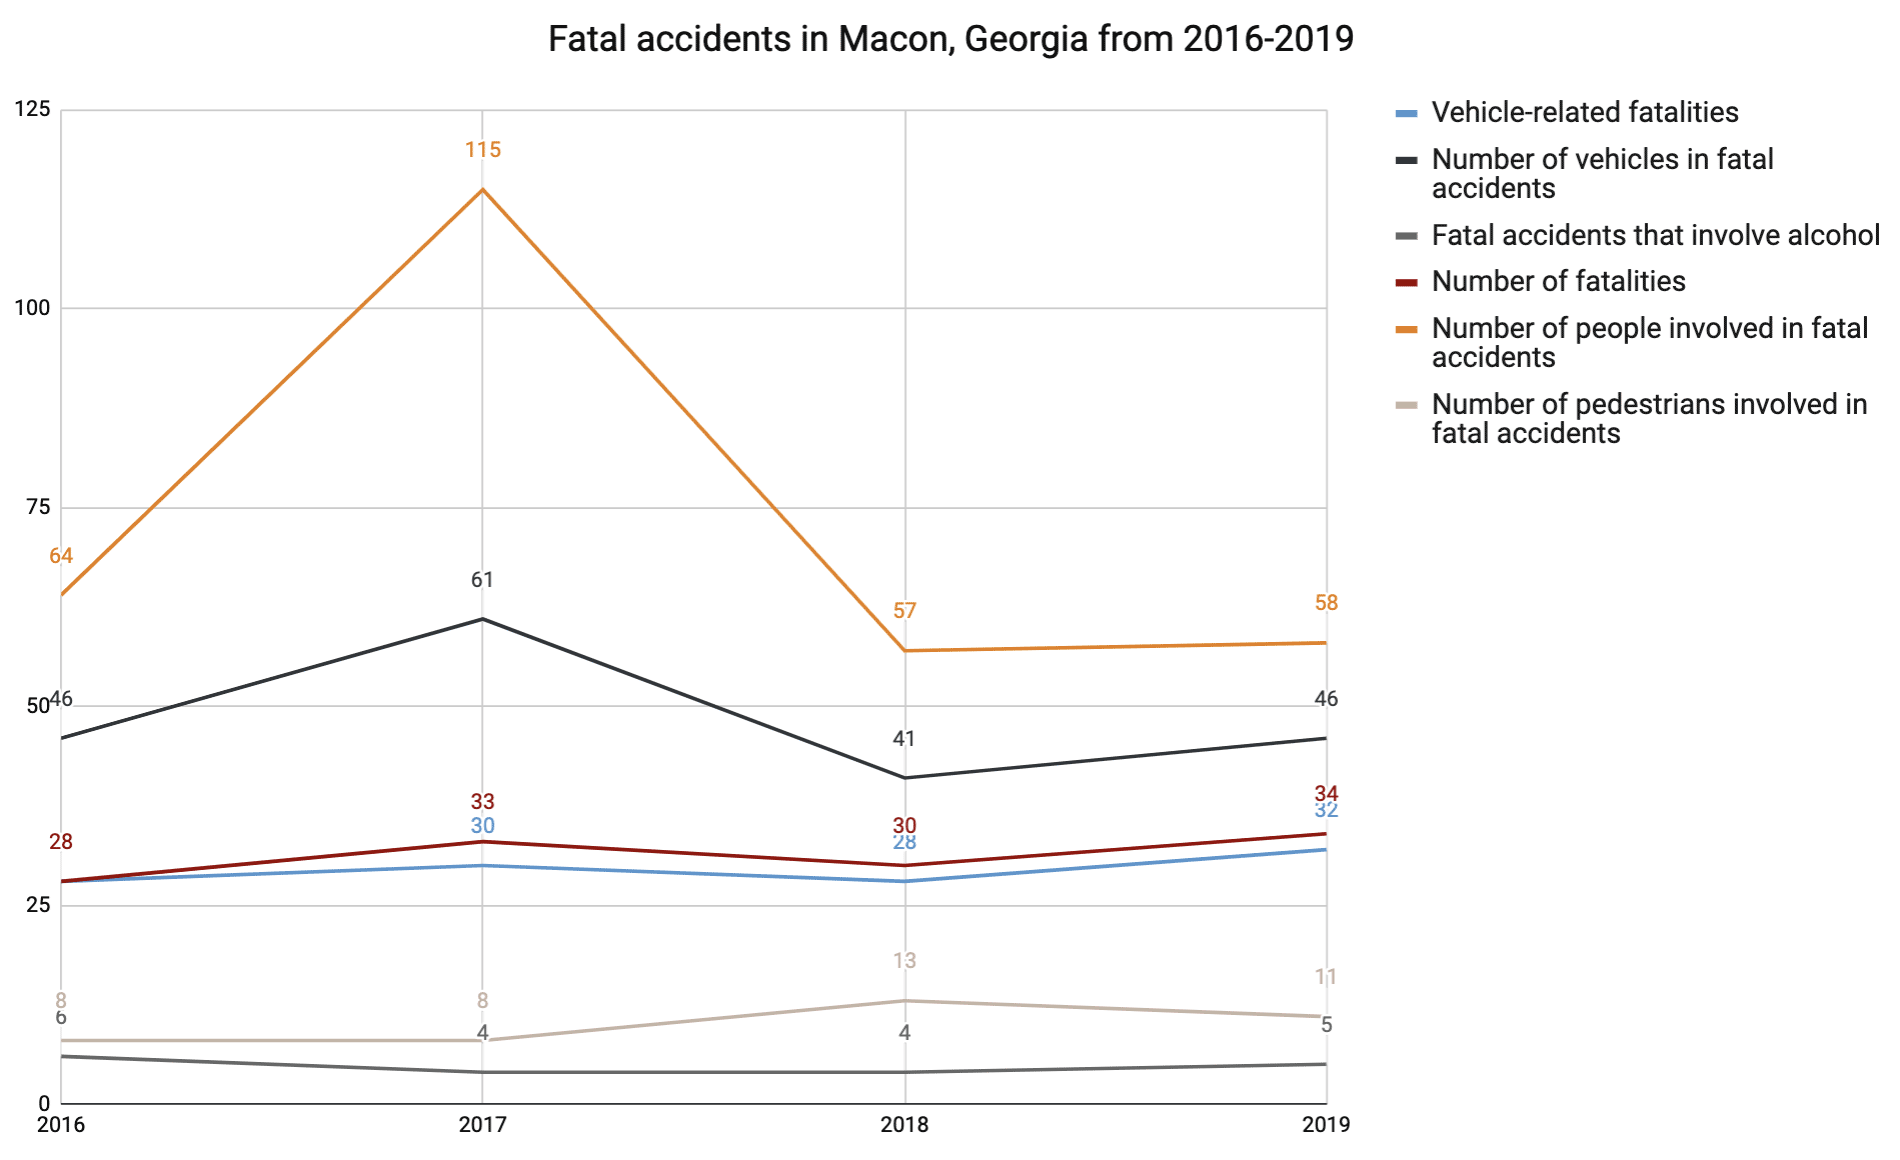 Fatal accidents in Macon, Georgia from 2016-2019